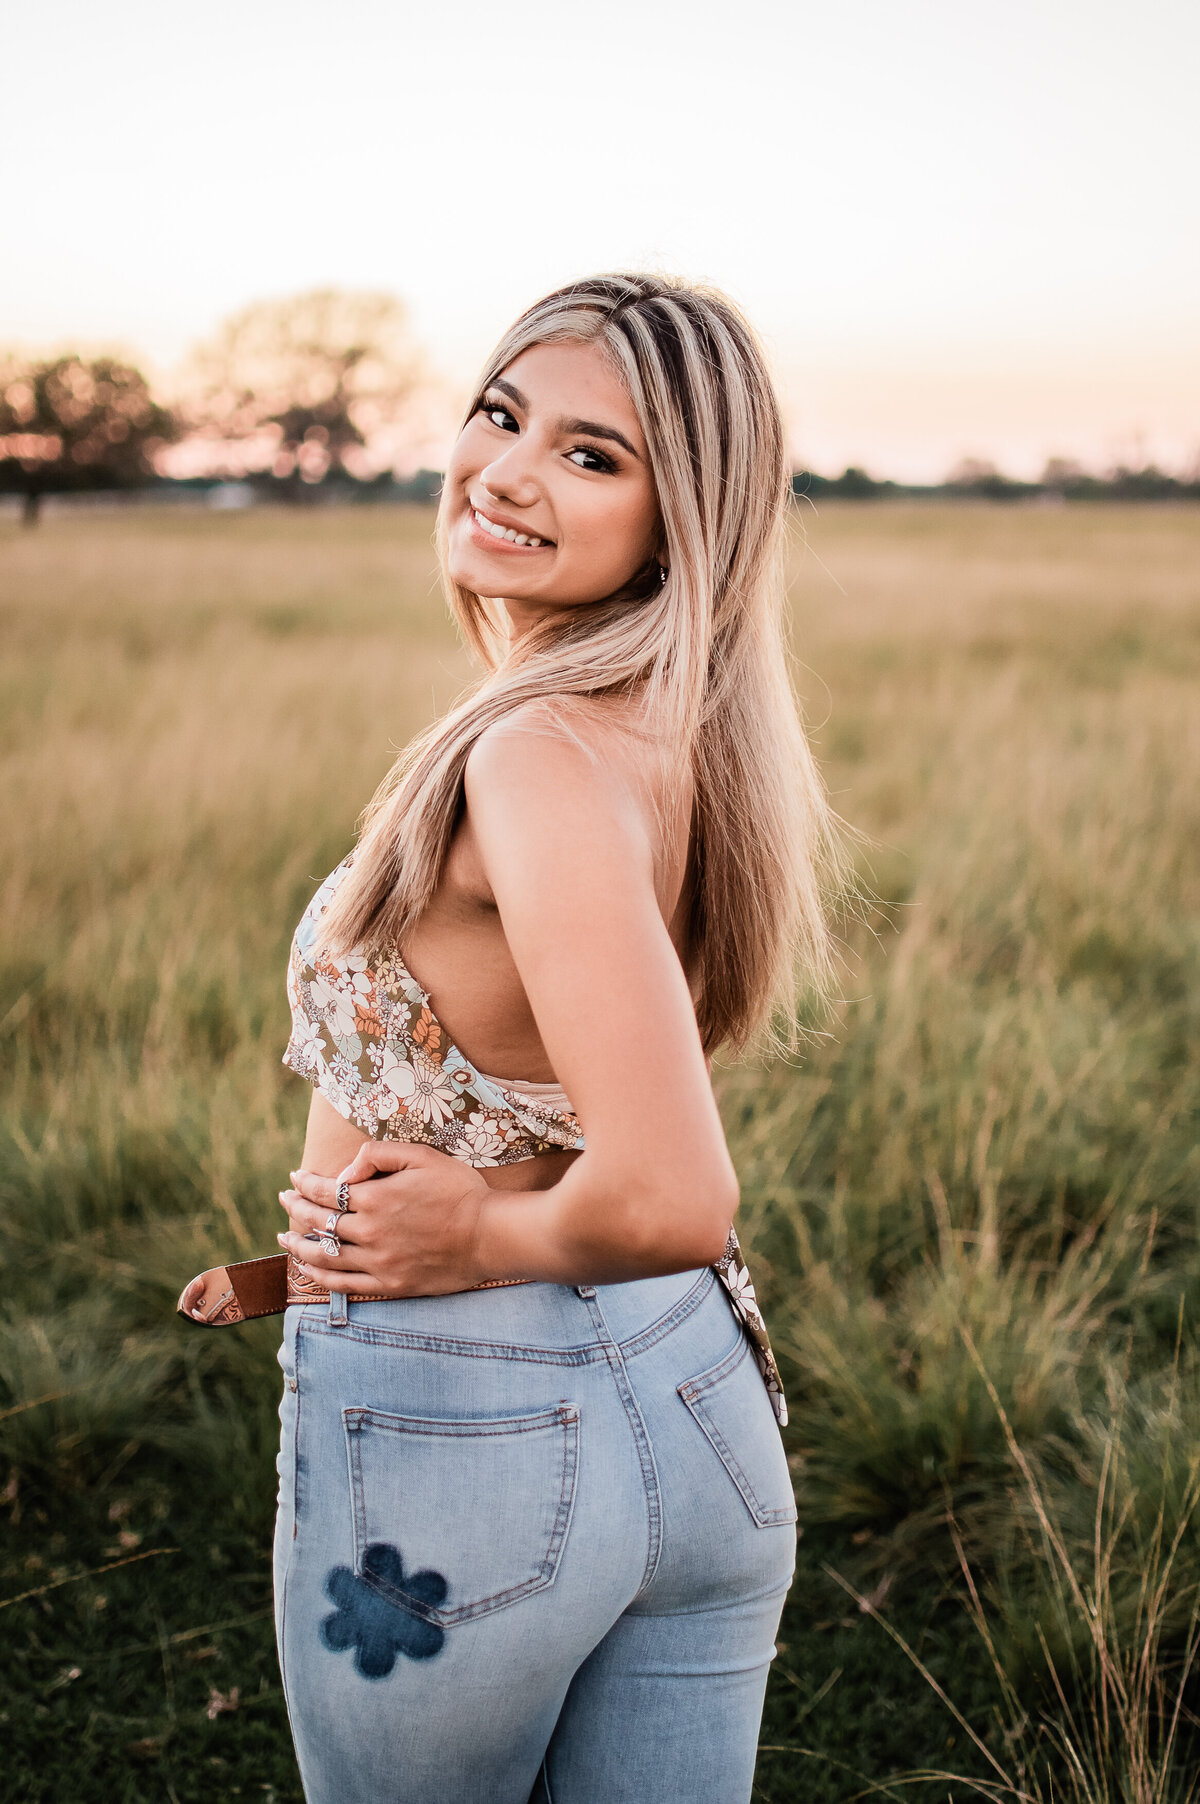 A high school graduate wearing jeans and a floral top looks over her shoulder in a grassy field.